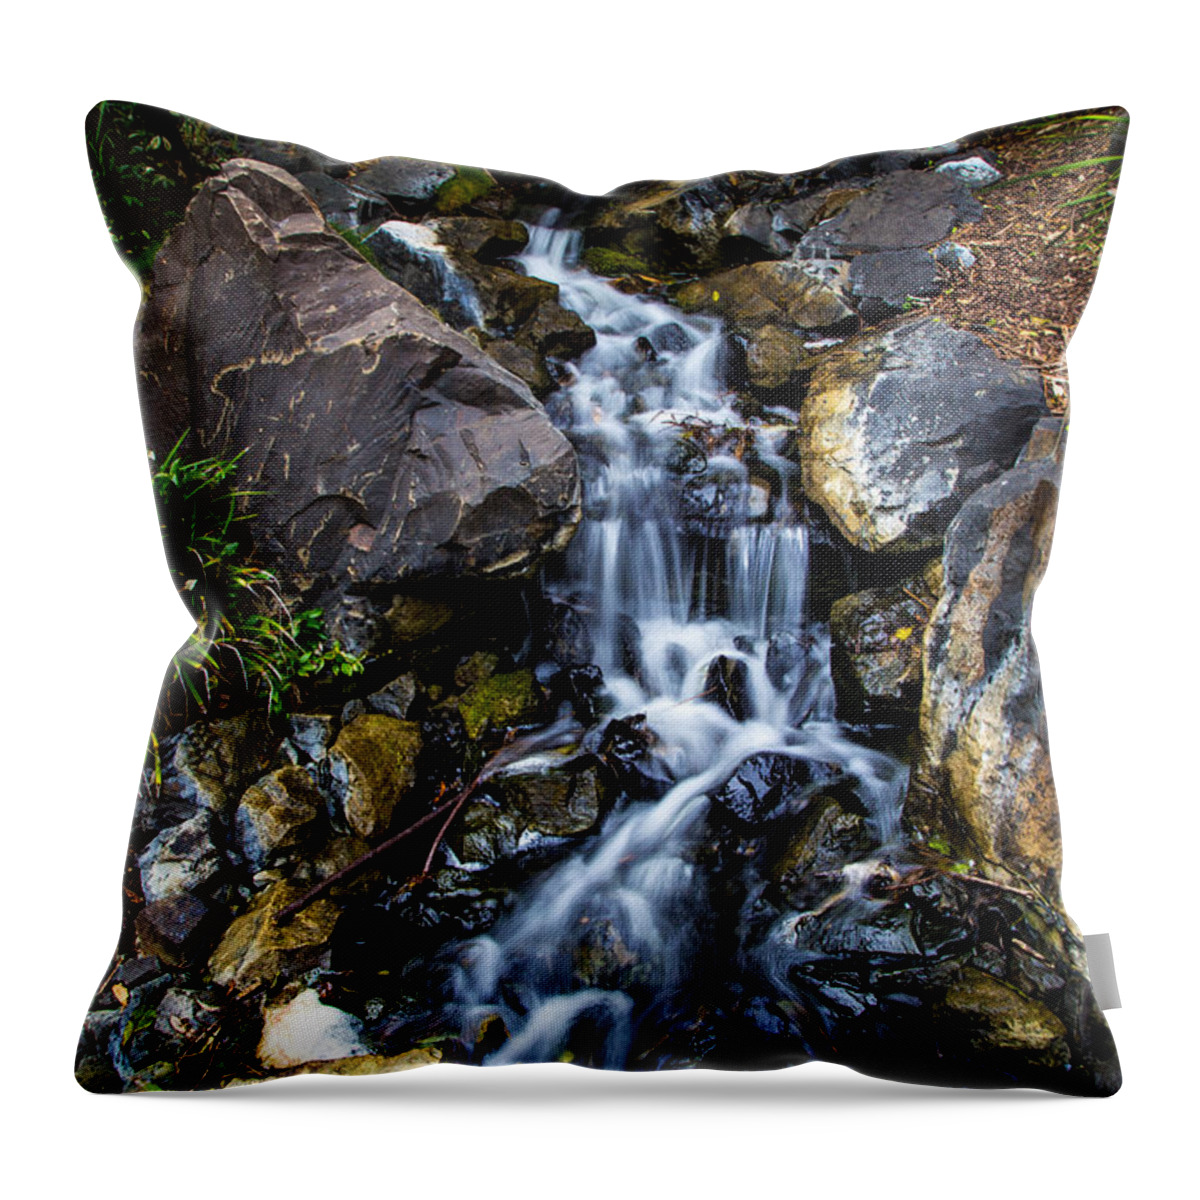 Water Throw Pillow featuring the photograph Stream by Keith Hawley